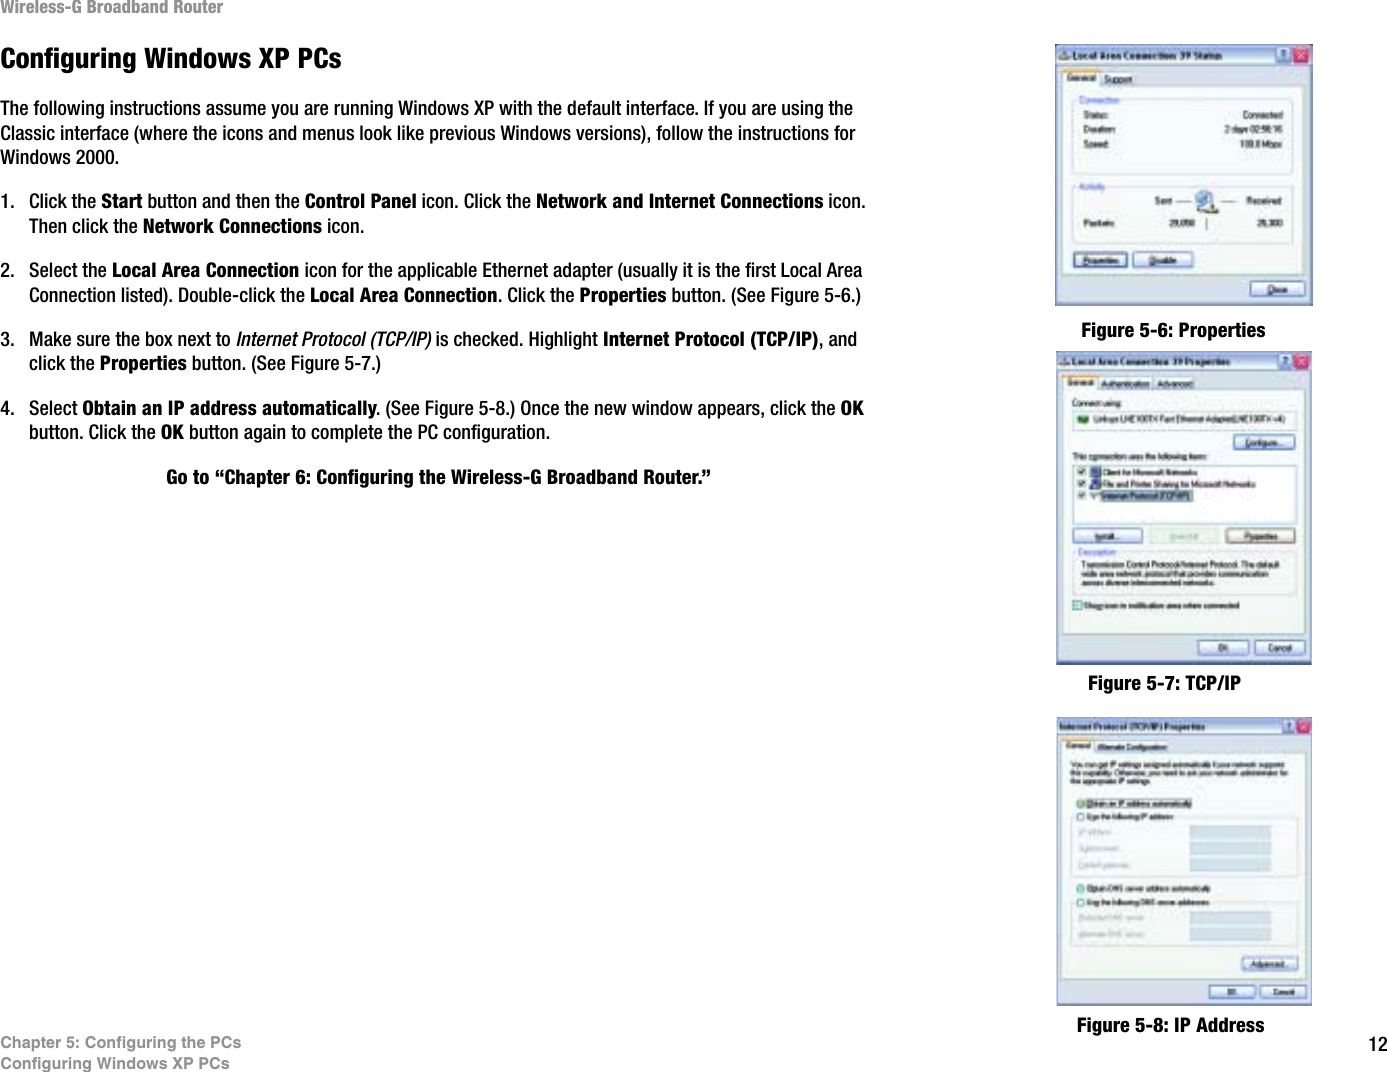 12Chapter 5: Configuring the PCsConfiguring Windows XP PCsWireless-G Broadband RouterConfiguring Windows XP PCsThe following instructions assume you are running Windows XP with the default interface. If you are using the Classic interface (where the icons and menus look like previous Windows versions), follow the instructions for Windows 2000.1. Click the Start button and then the Control Panel icon. Click the Network and Internet Connections icon. Then click the Network Connections icon.2. Select the Local Area Connection icon for the applicable Ethernet adapter (usually it is the first Local Area Connection listed). Double-click the Local Area Connection. Click the Properties button. (See Figure 5-6.)3. Make sure the box next to Internet Protocol (TCP/IP) is checked. Highlight Internet Protocol (TCP/IP), and click the Properties button. (See Figure 5-7.)4. Select Obtain an IP address automatically. (See Figure 5-8.) Once the new window appears, click the OKbutton. Click the OK button again to complete the PC configuration.Go to “Chapter 6: Configuring the Wireless-G Broadband Router.”Figure 5-6: PropertiesFigure 5-7: TCP/IPFigure 5-8: IP Address